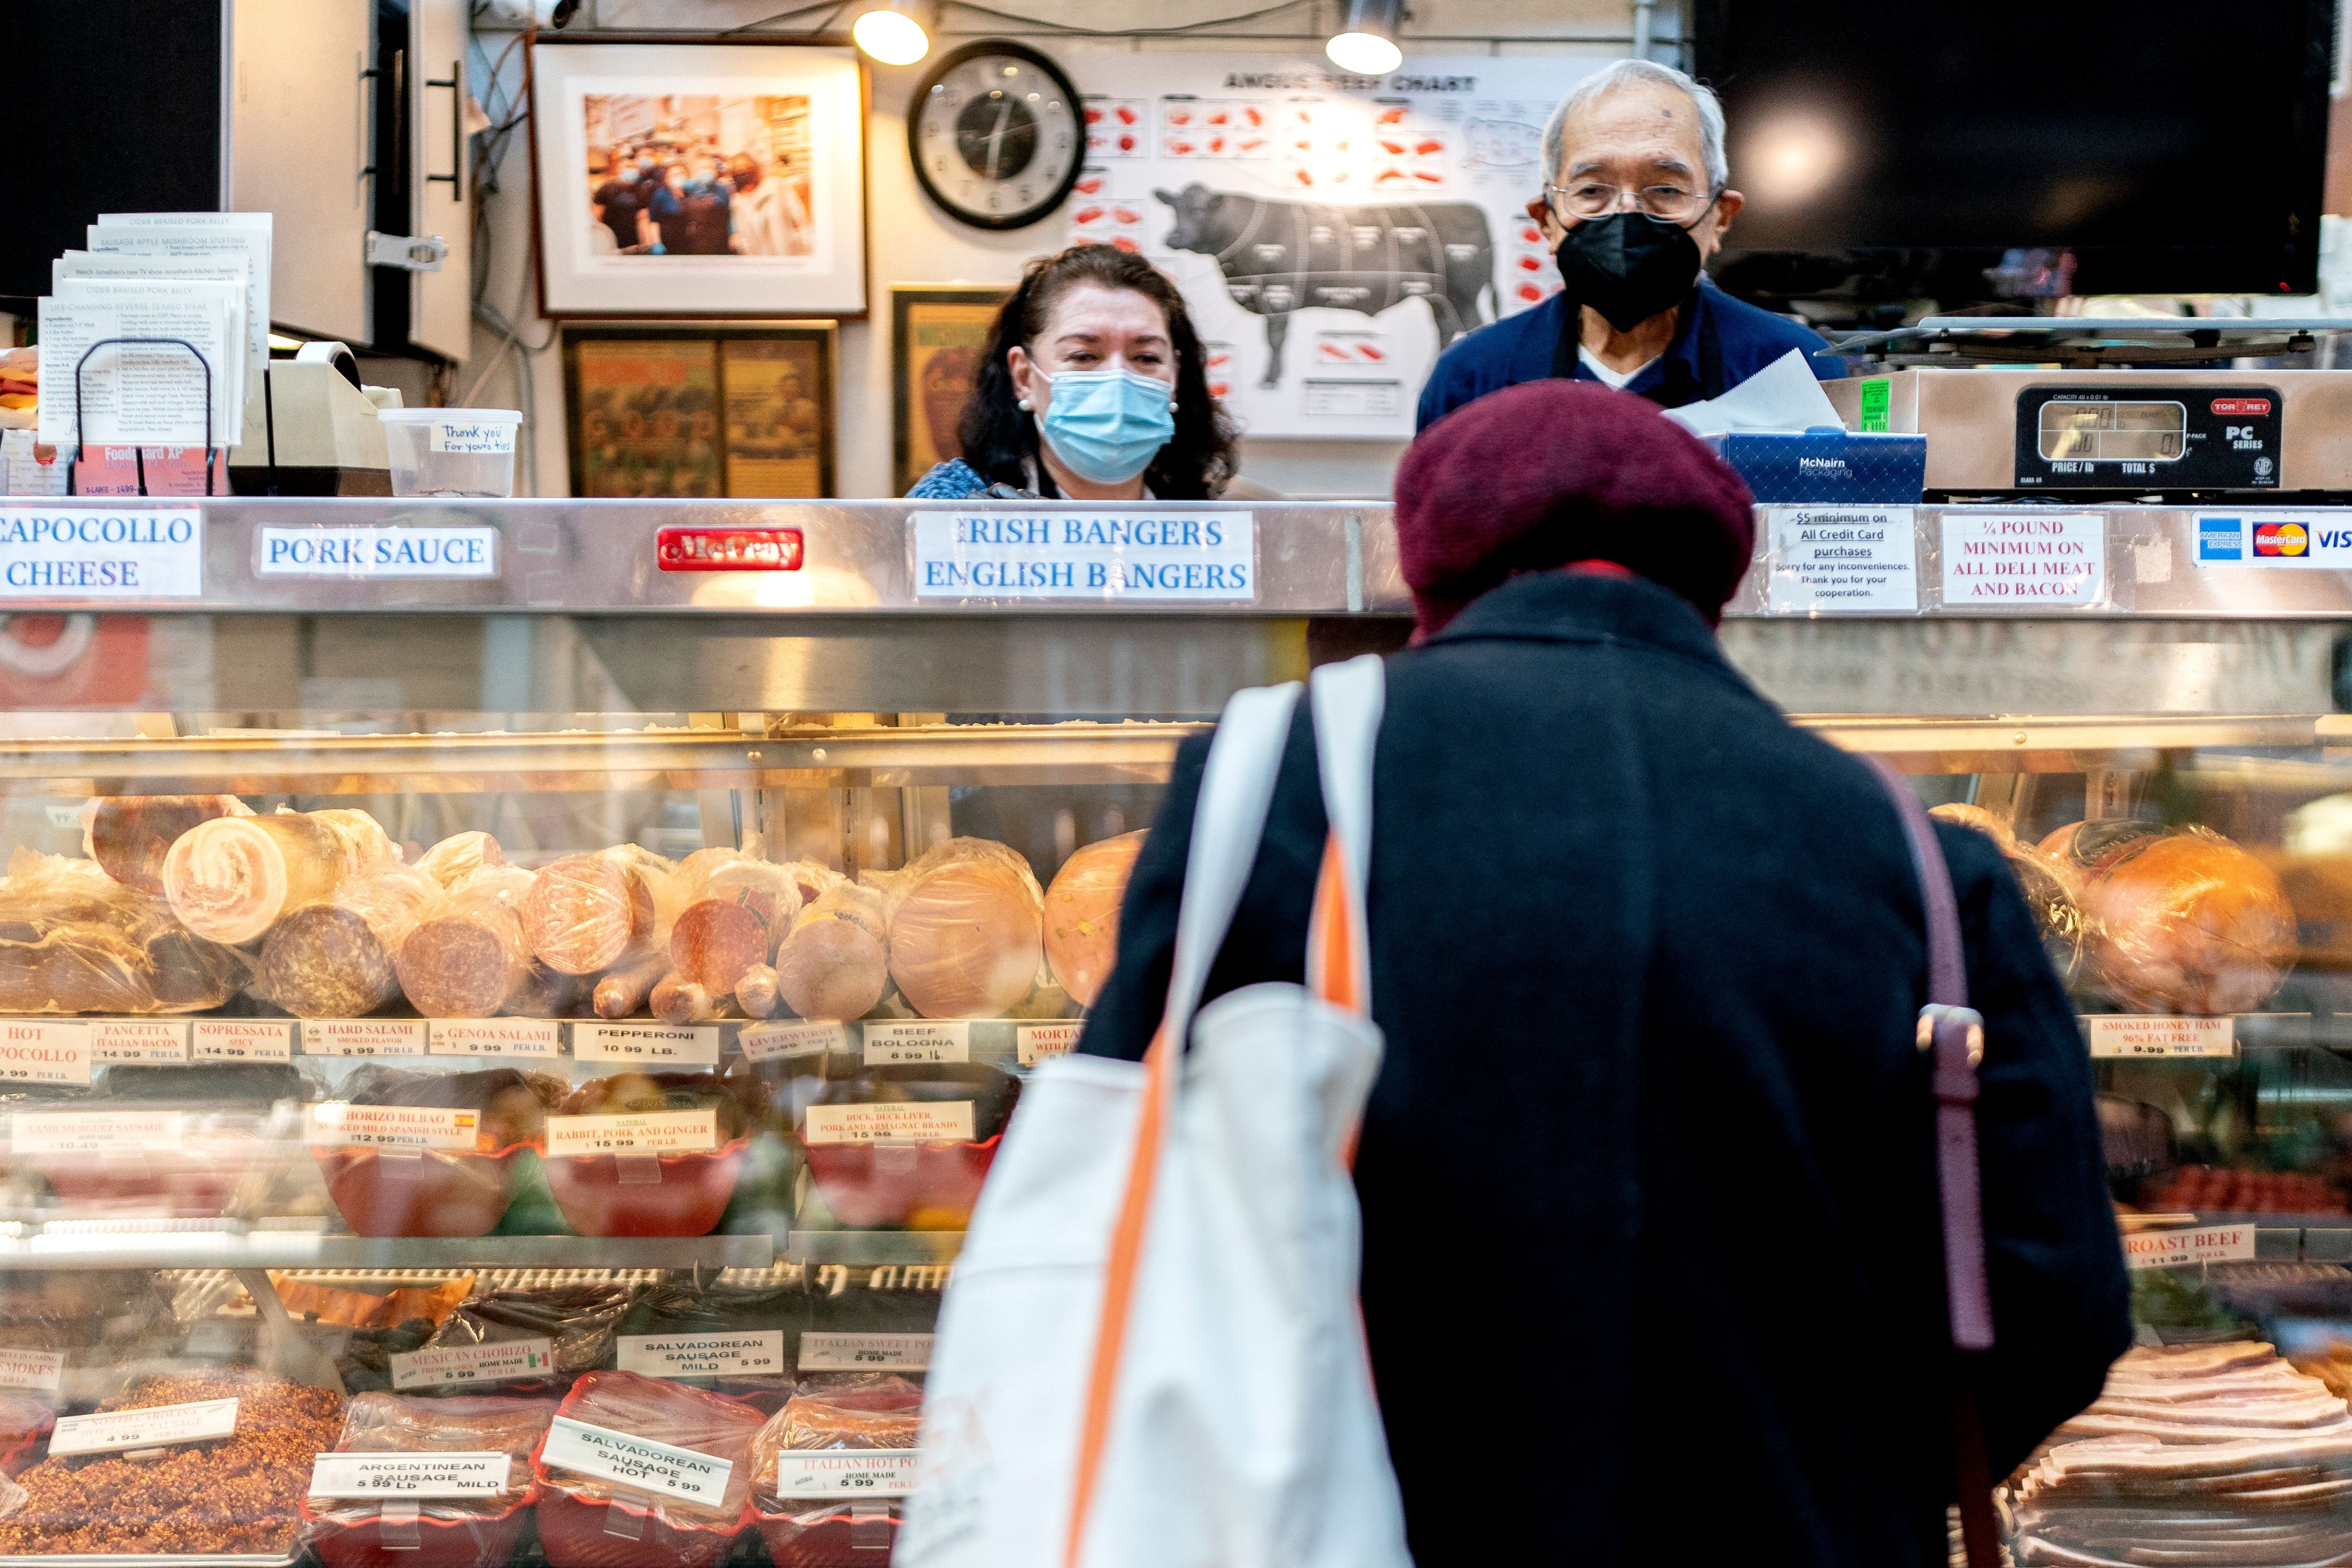 Employees assist a customer at Canales Quality Meats in Eastern Market in Washington, DC, on Feb. 8, 2022. (Stefani Reynolds—AFP/Getty Images)